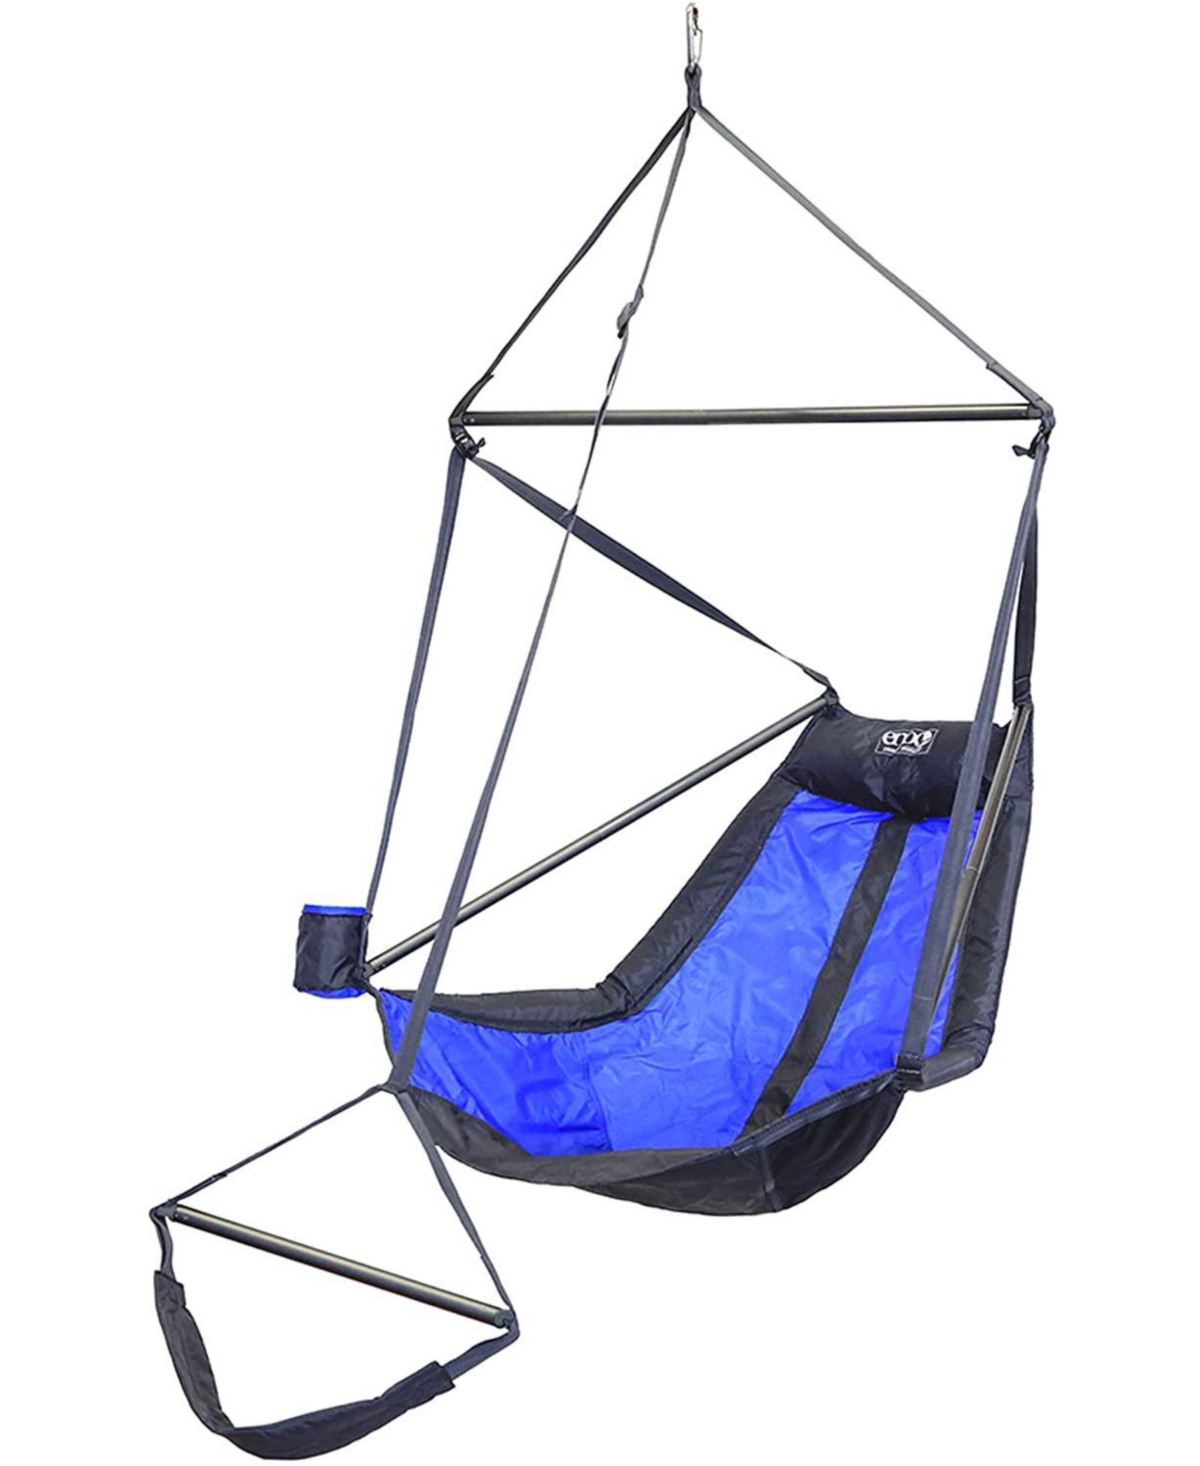 Lounger Hanging Chair - Portable Outdoor Hiking, Backpacking, Beach, Camping, and Festival Hammock Chair - Purple/Teal - Purple/Teal